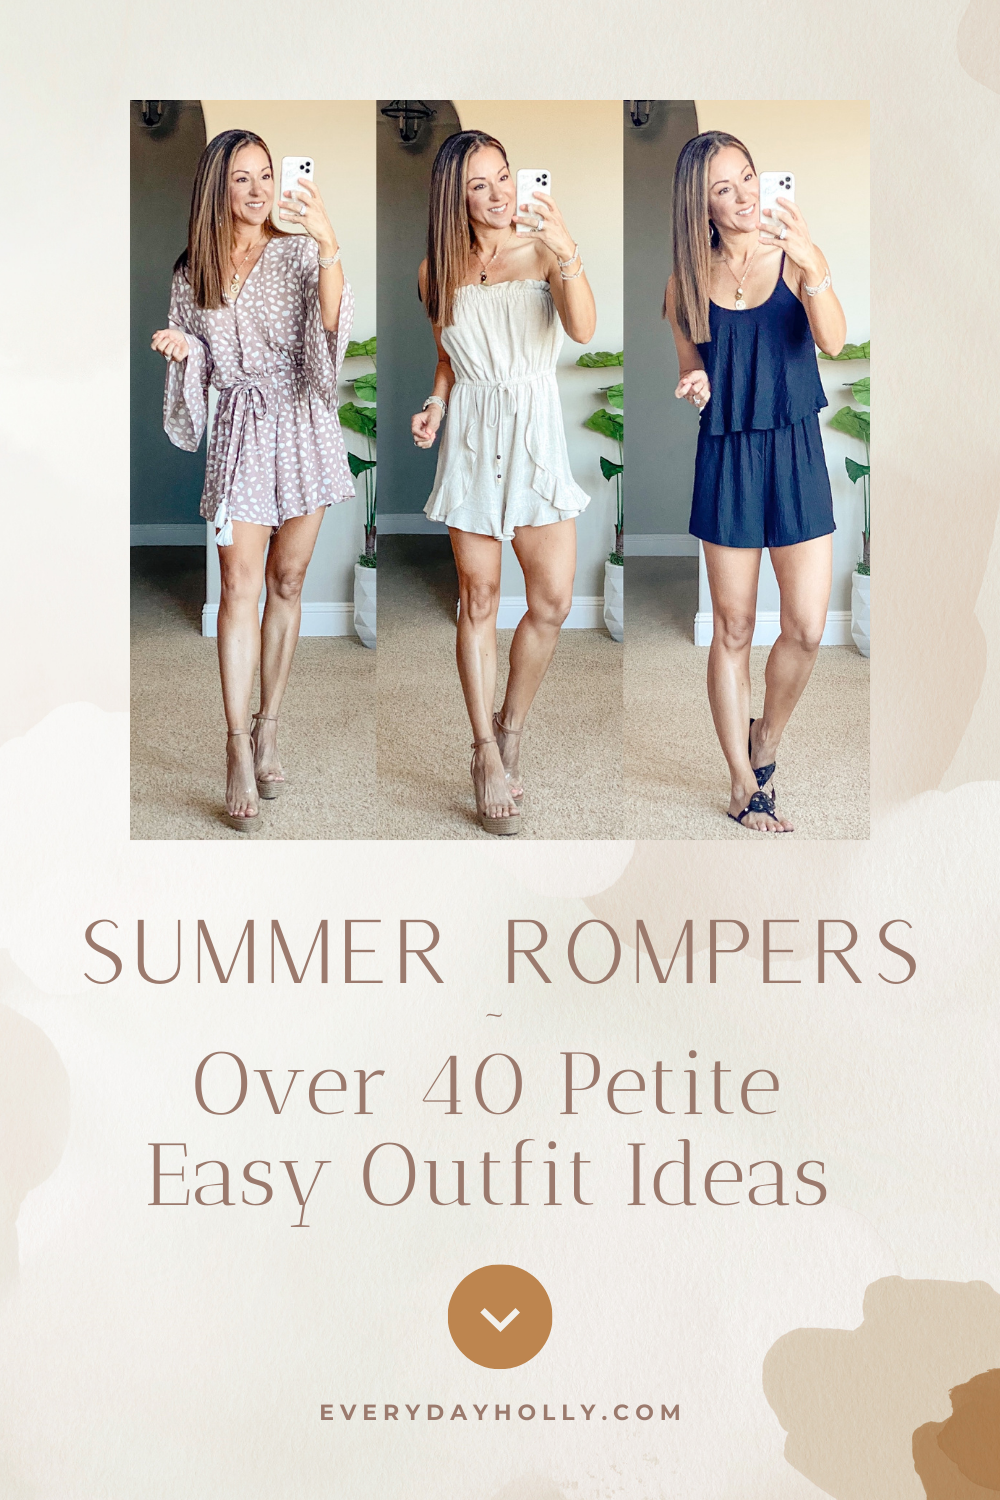 Dresses For Petite Women – Great Outfit Ideas